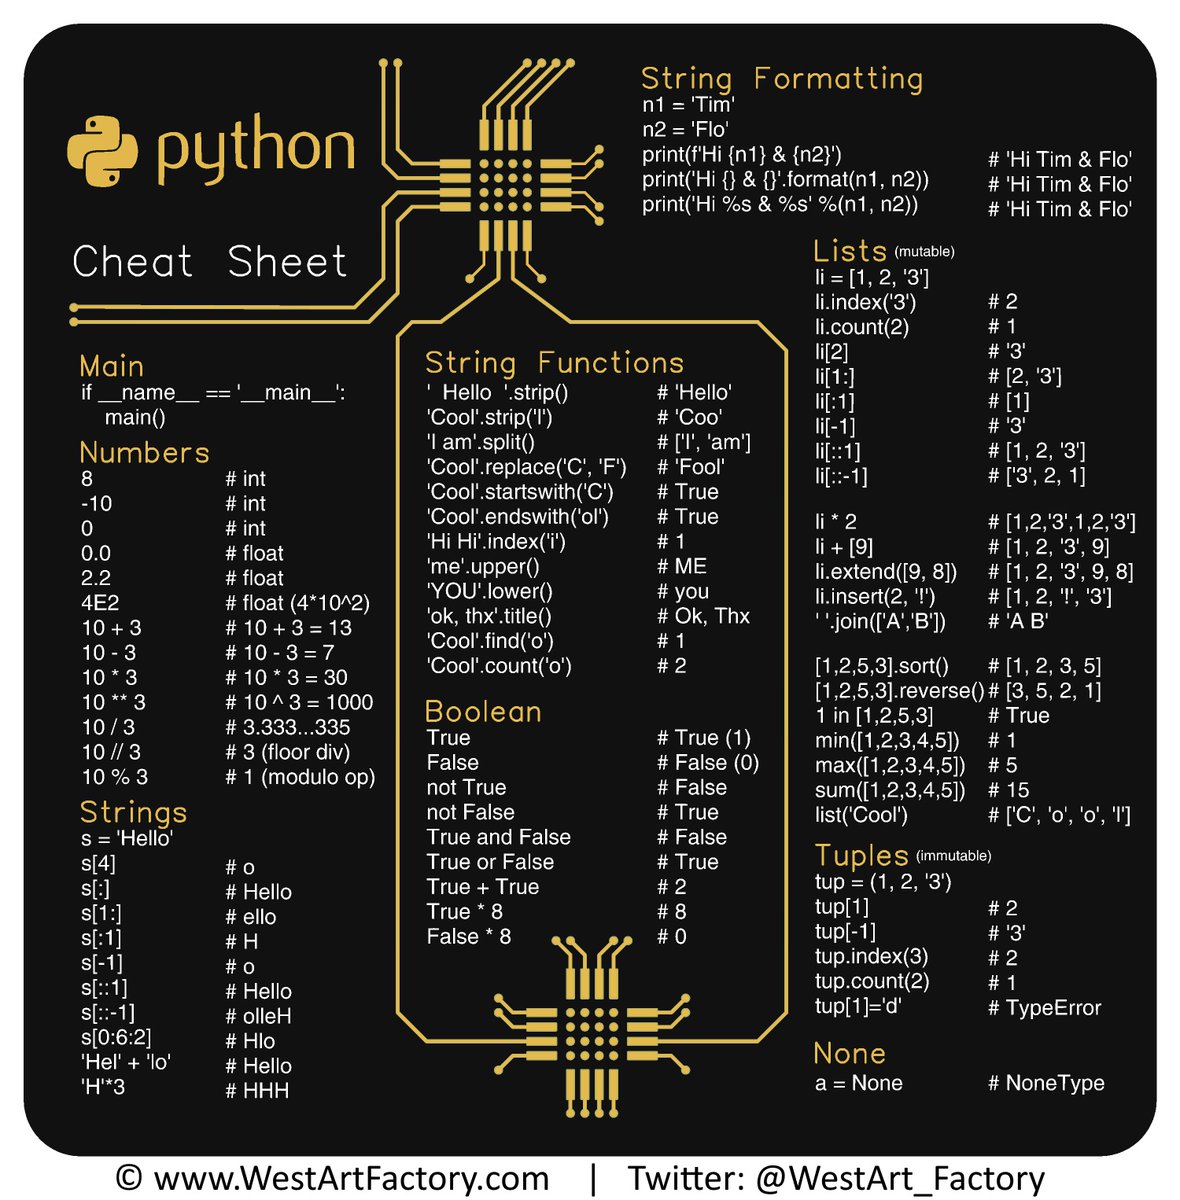 🐍 Check out this Python Cheat Sheet! 📚 Page 1 of 2 - Dive into essential Python concepts. Save it for quick reference! #Python #Programming #CodingTips #CodeNewbie #DeveloperCommunity #LearnToCode #TechKnowledge #Python3 #CodeSnippets #ProgrammingLife #CodingSkills #DevTips